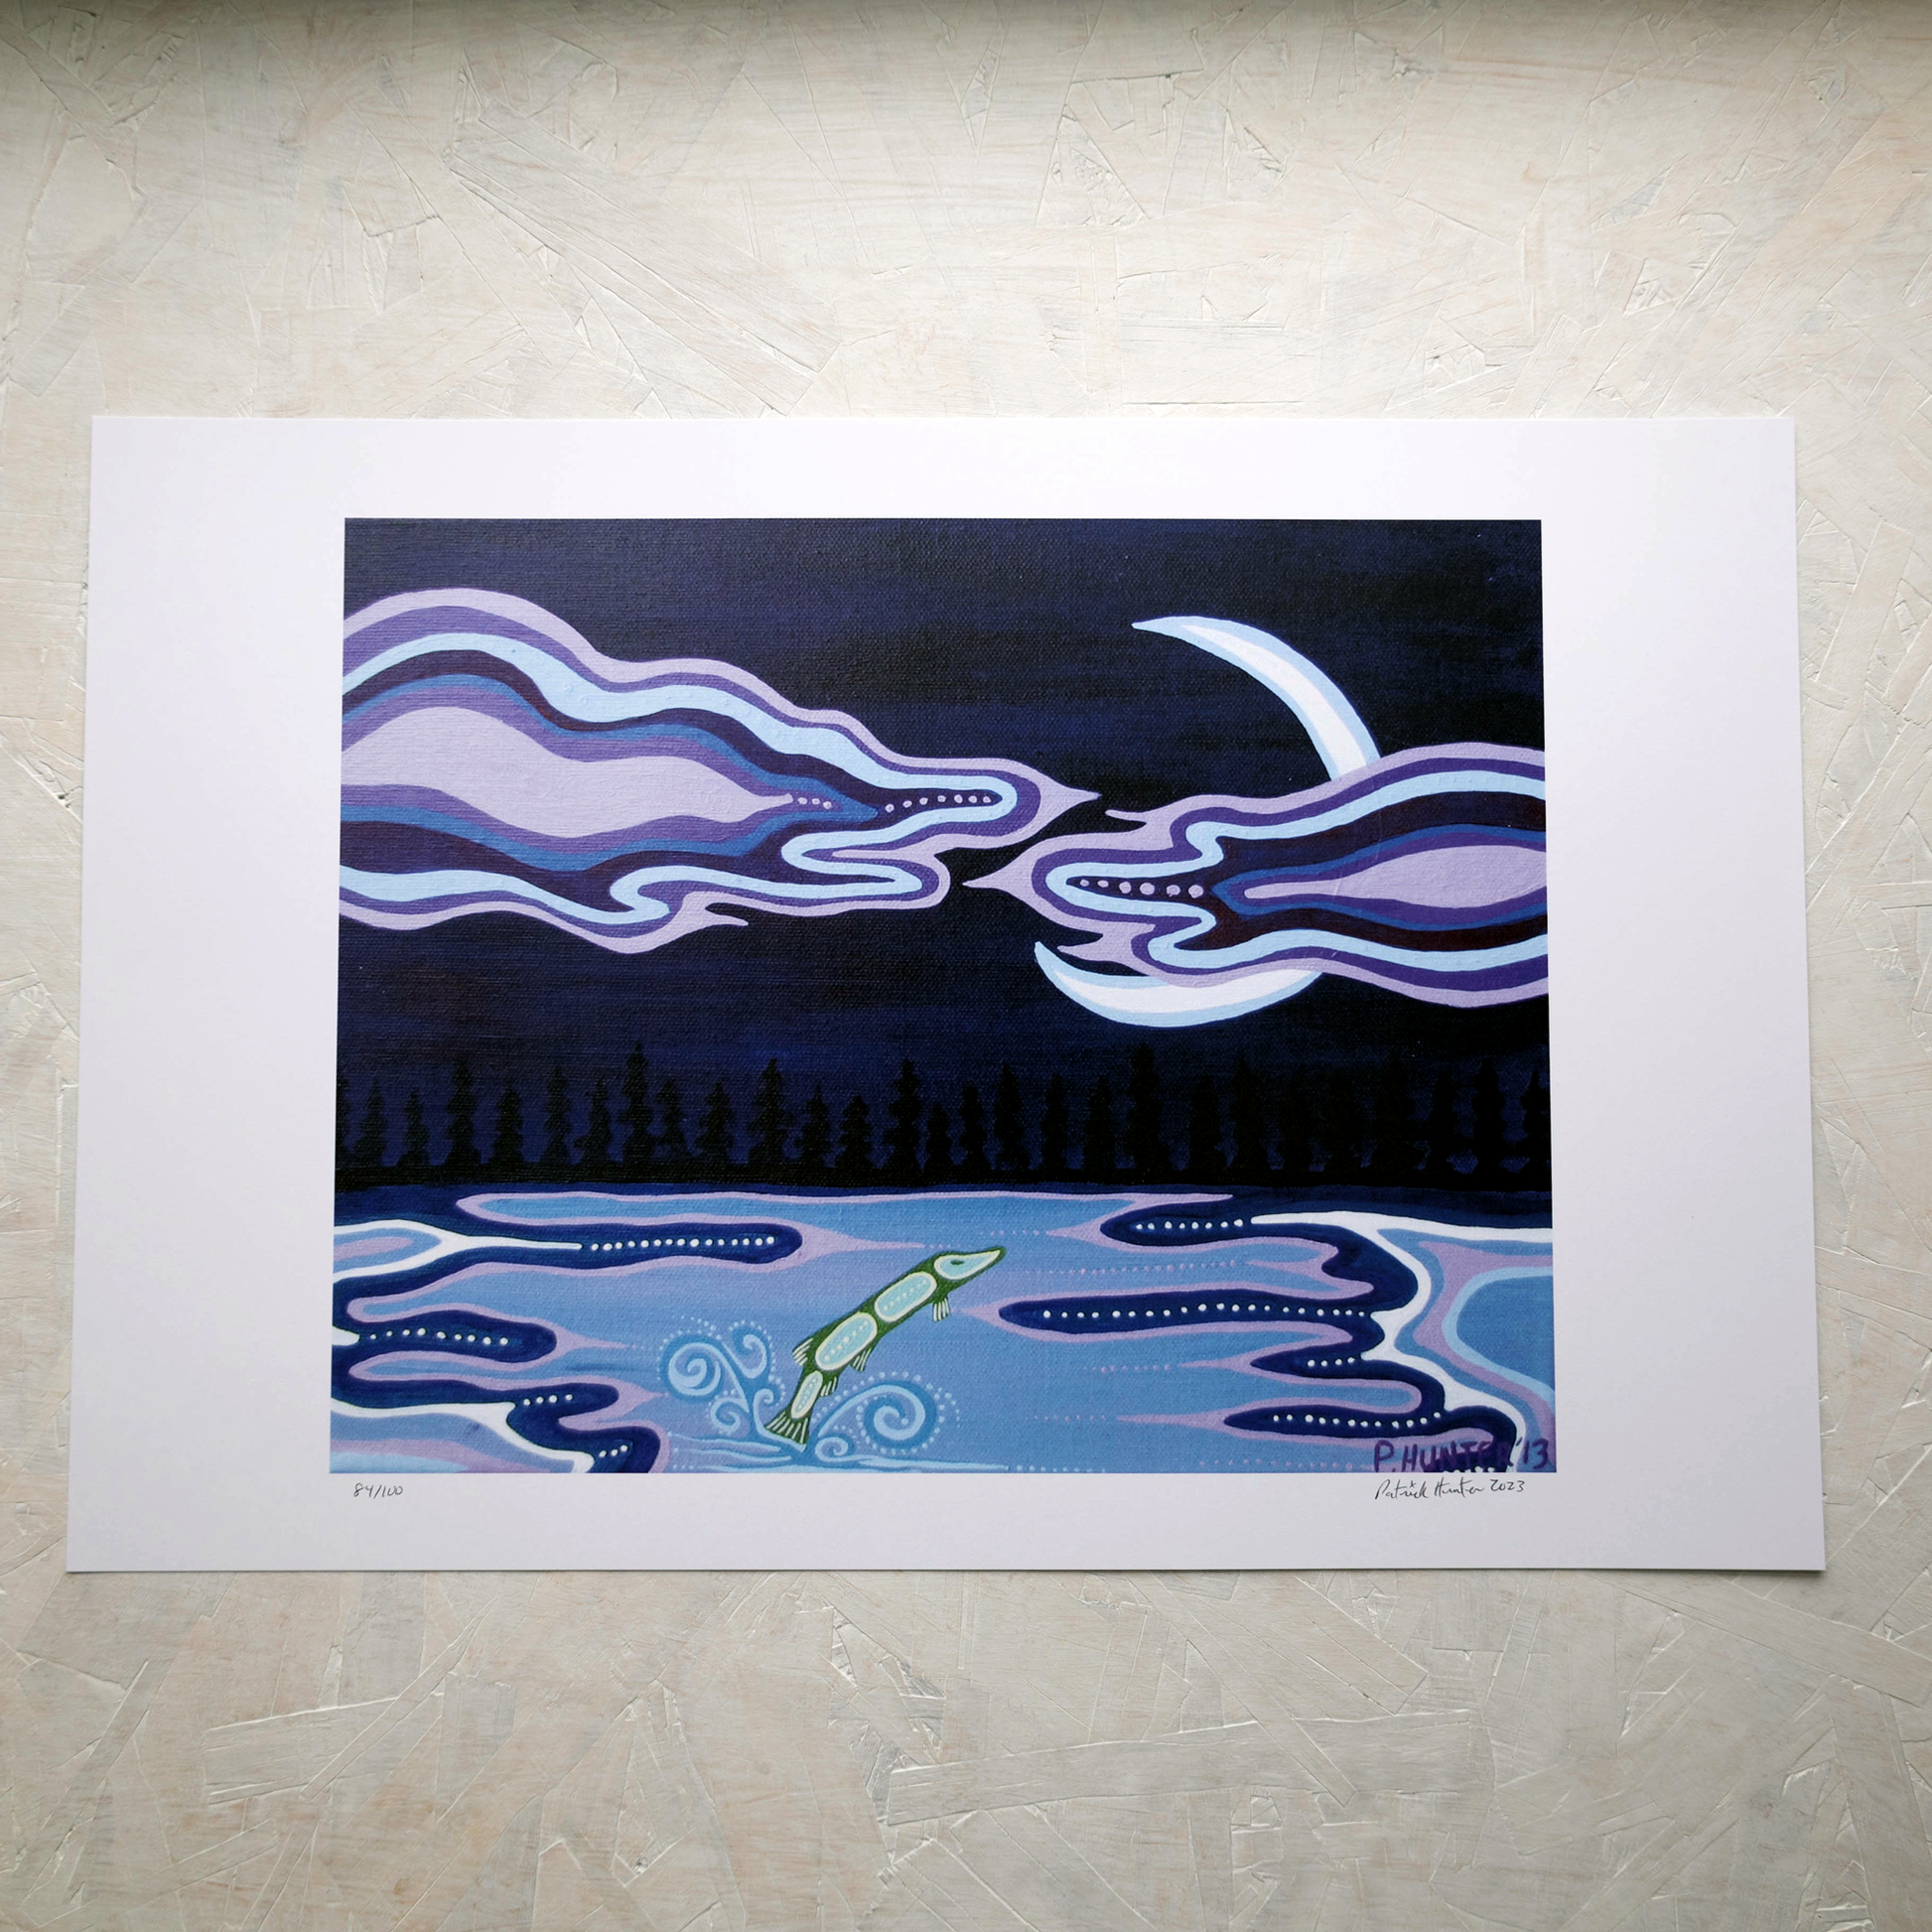 Print of Patrick Hunter's painting of a fish jumping out of water under a crescent moon partially covered by clouds, woodland art style.